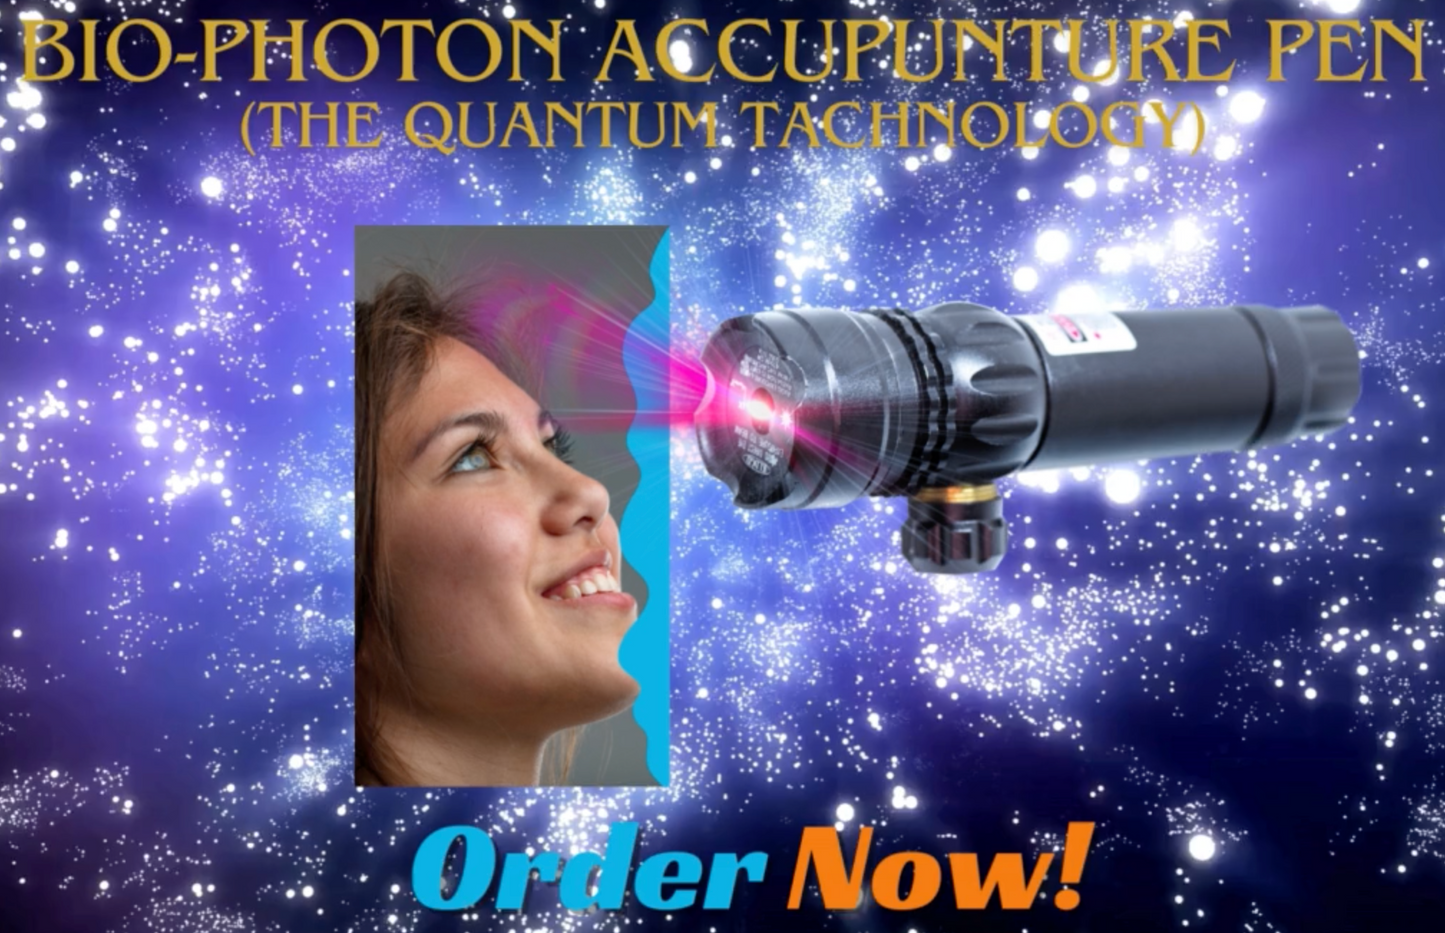 Biophoton Acupuncture Pen / Violet Wand / Angle Wand